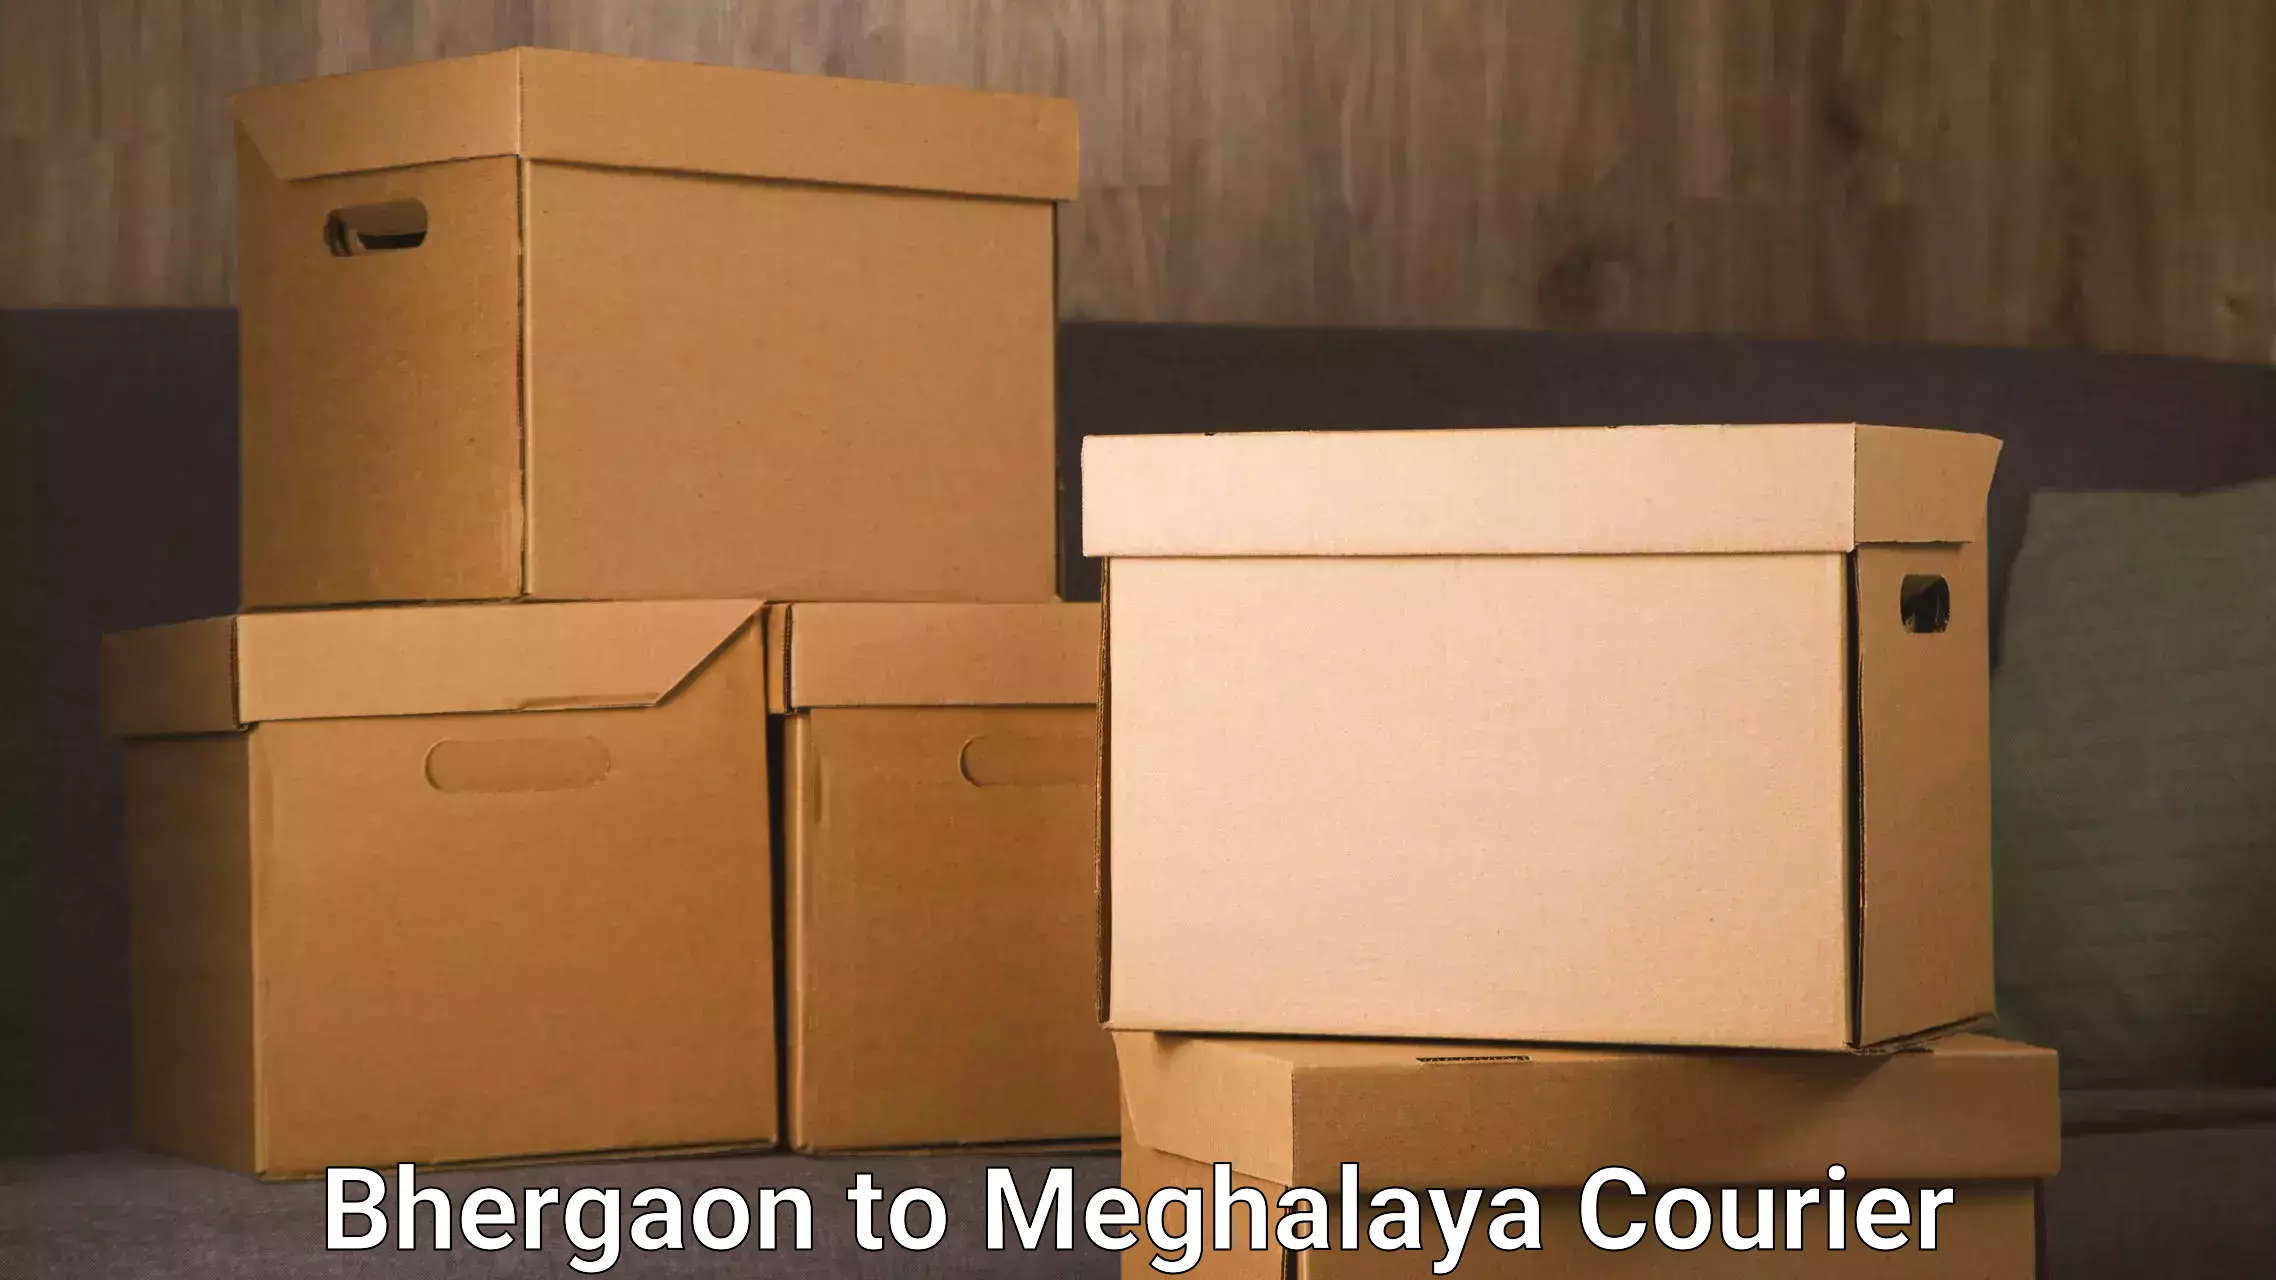 Professional courier handling Bhergaon to Shillong